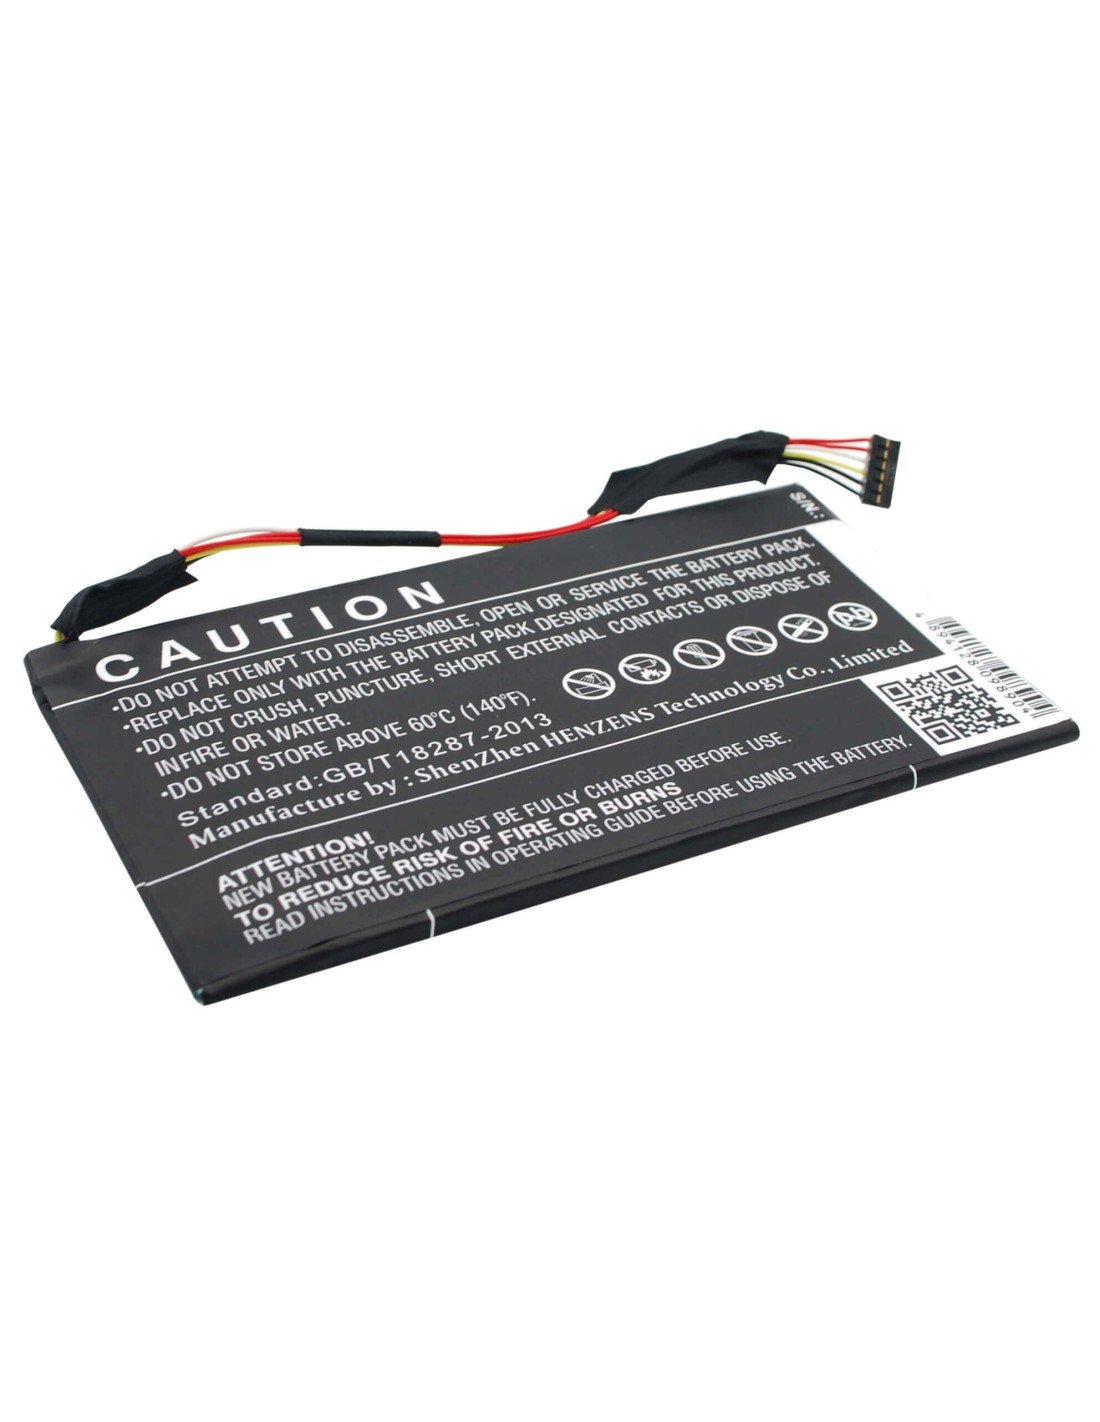 Battery for Asus Padfone Infinity A80 Tablet, Padfone Infinity A80 10.1 3.75V, 5050mAh - 18.94Wh